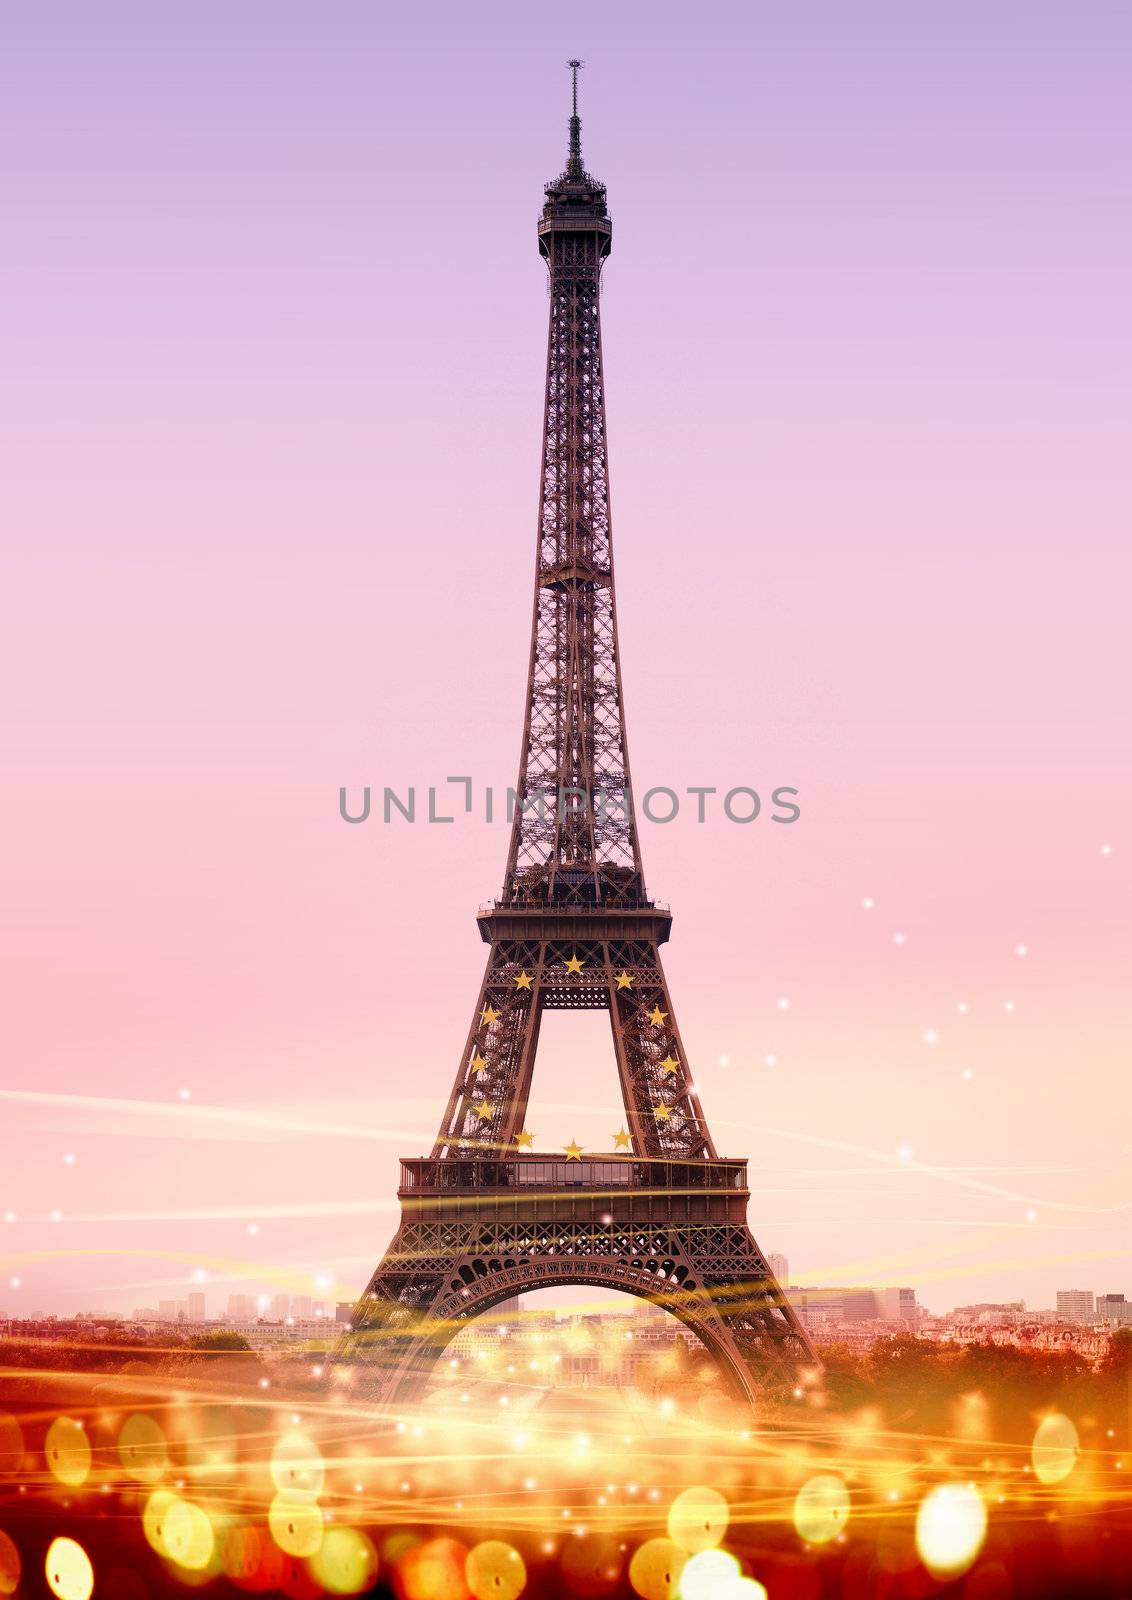 Eiffel Tower by ssuaphoto